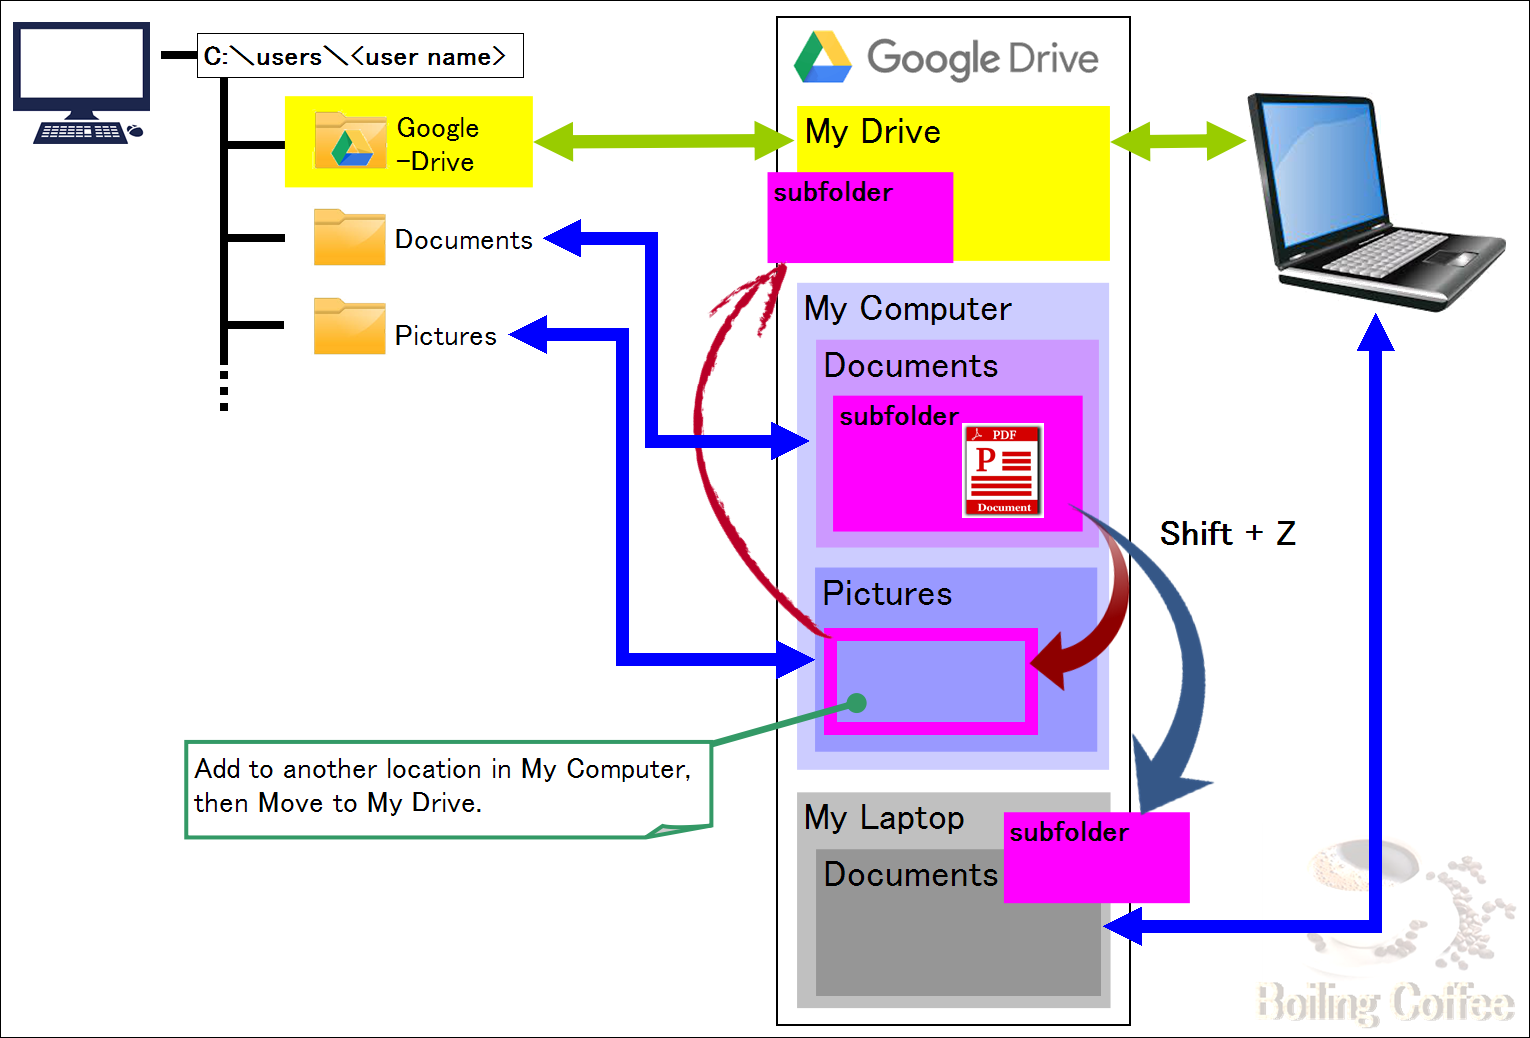 How do I sync two computers with Google Drive?